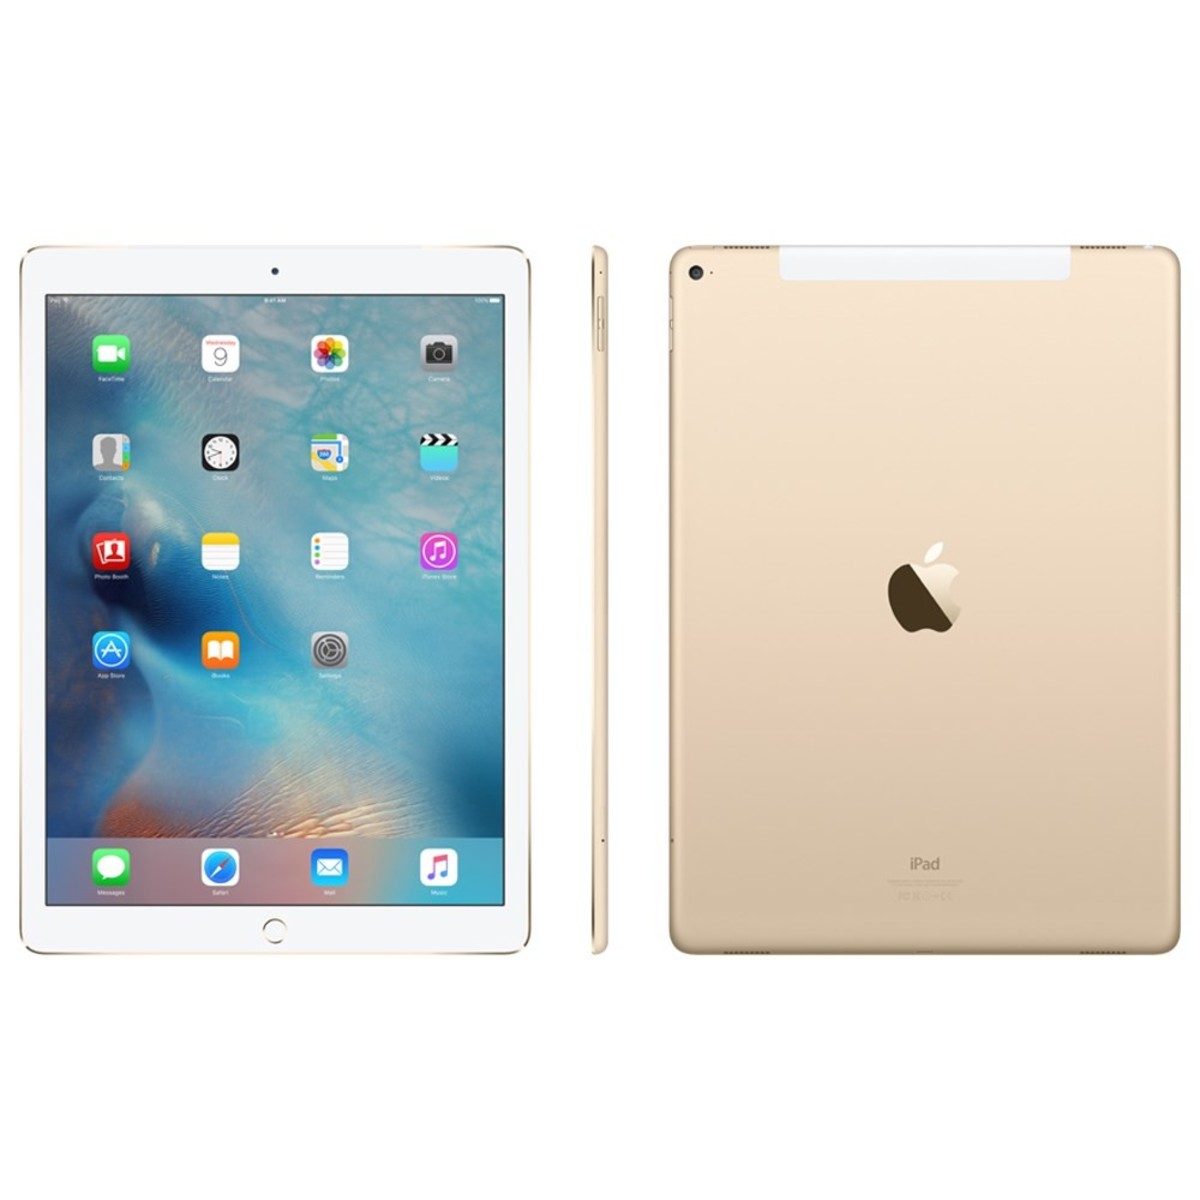 Apple iPad Pro Wi-Fi + Cellular 9.7inch 128GB Gold Online at Best Price